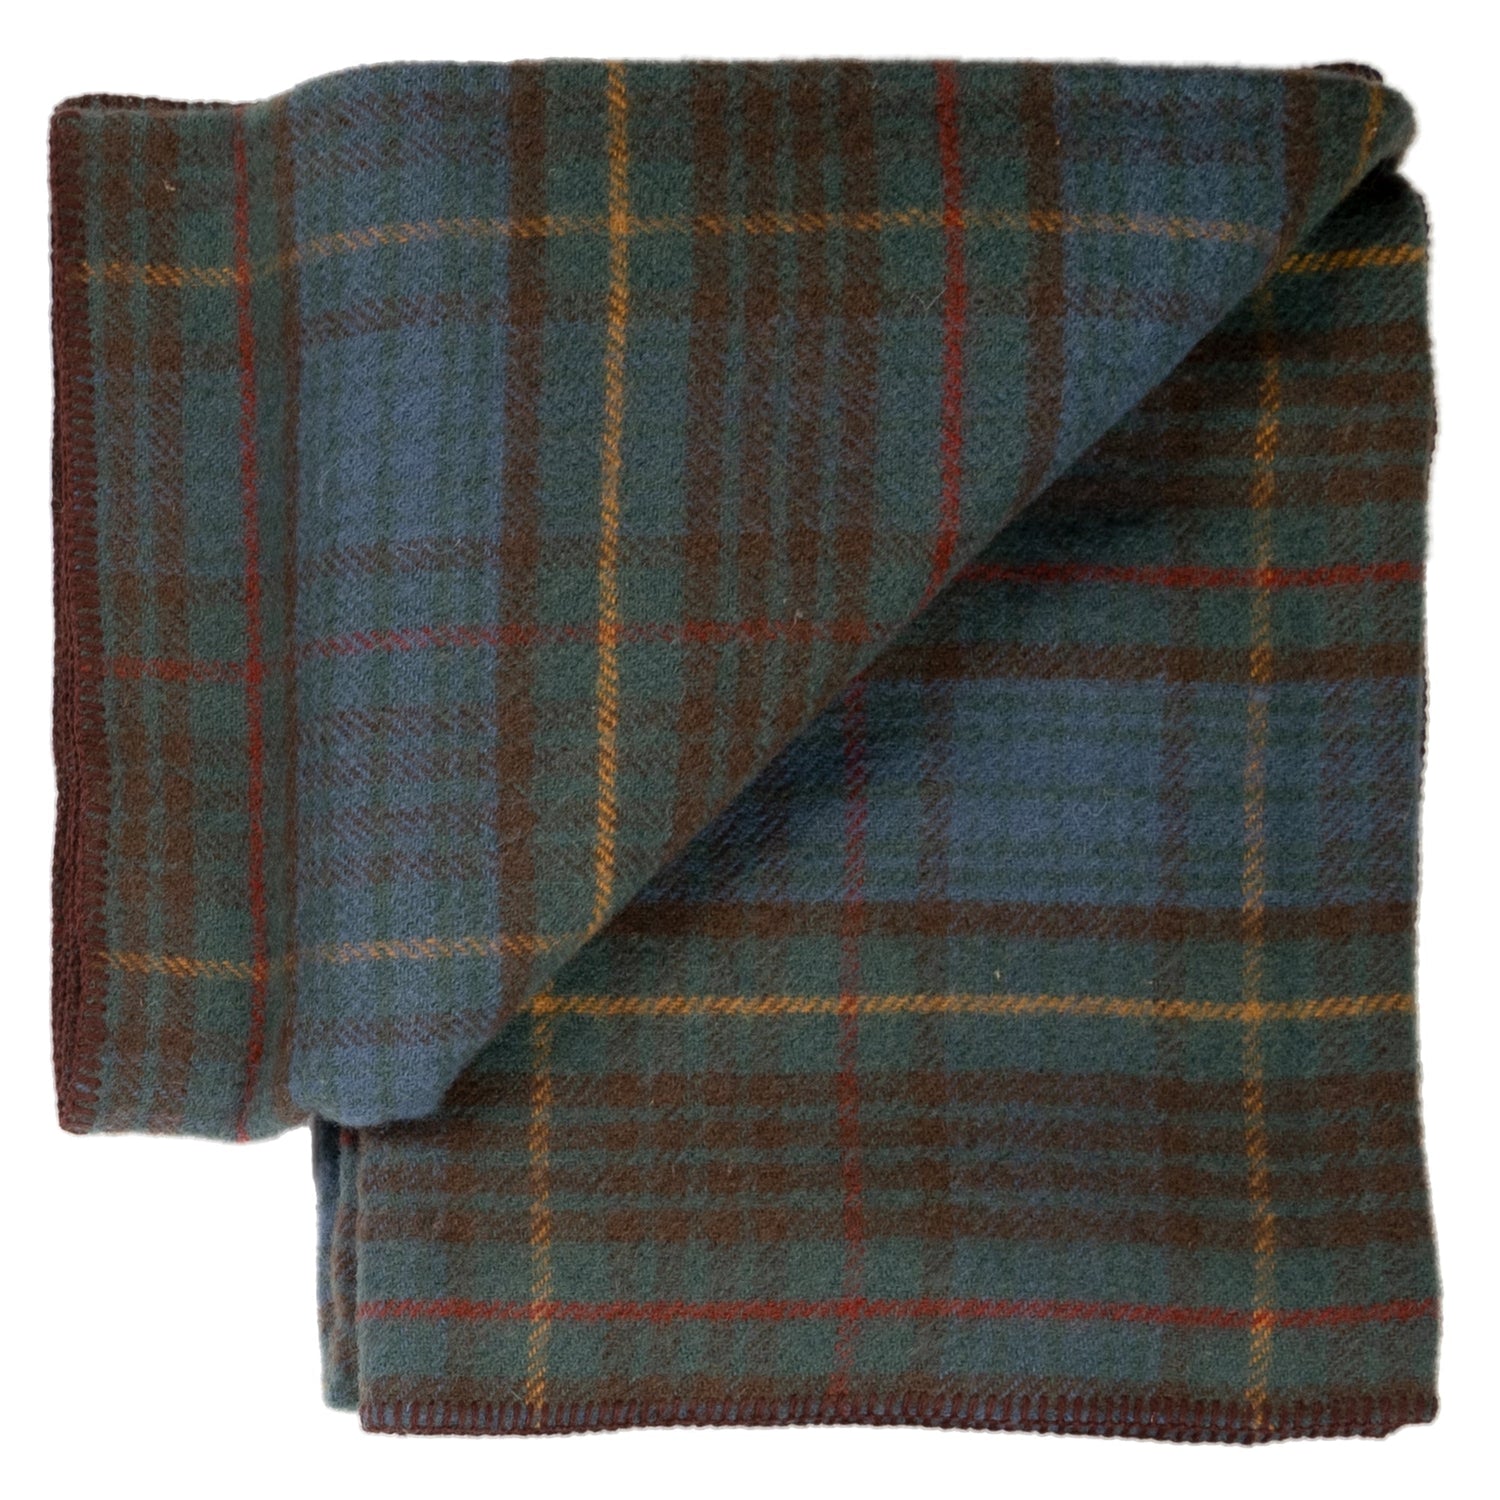 Prince of Scots Highland Tweeds BIG Throw ~ Antique Hunting Stewart ~-Throws and Blankets-810032752965-BIGThrowAntiqueHunting-Prince of Scots